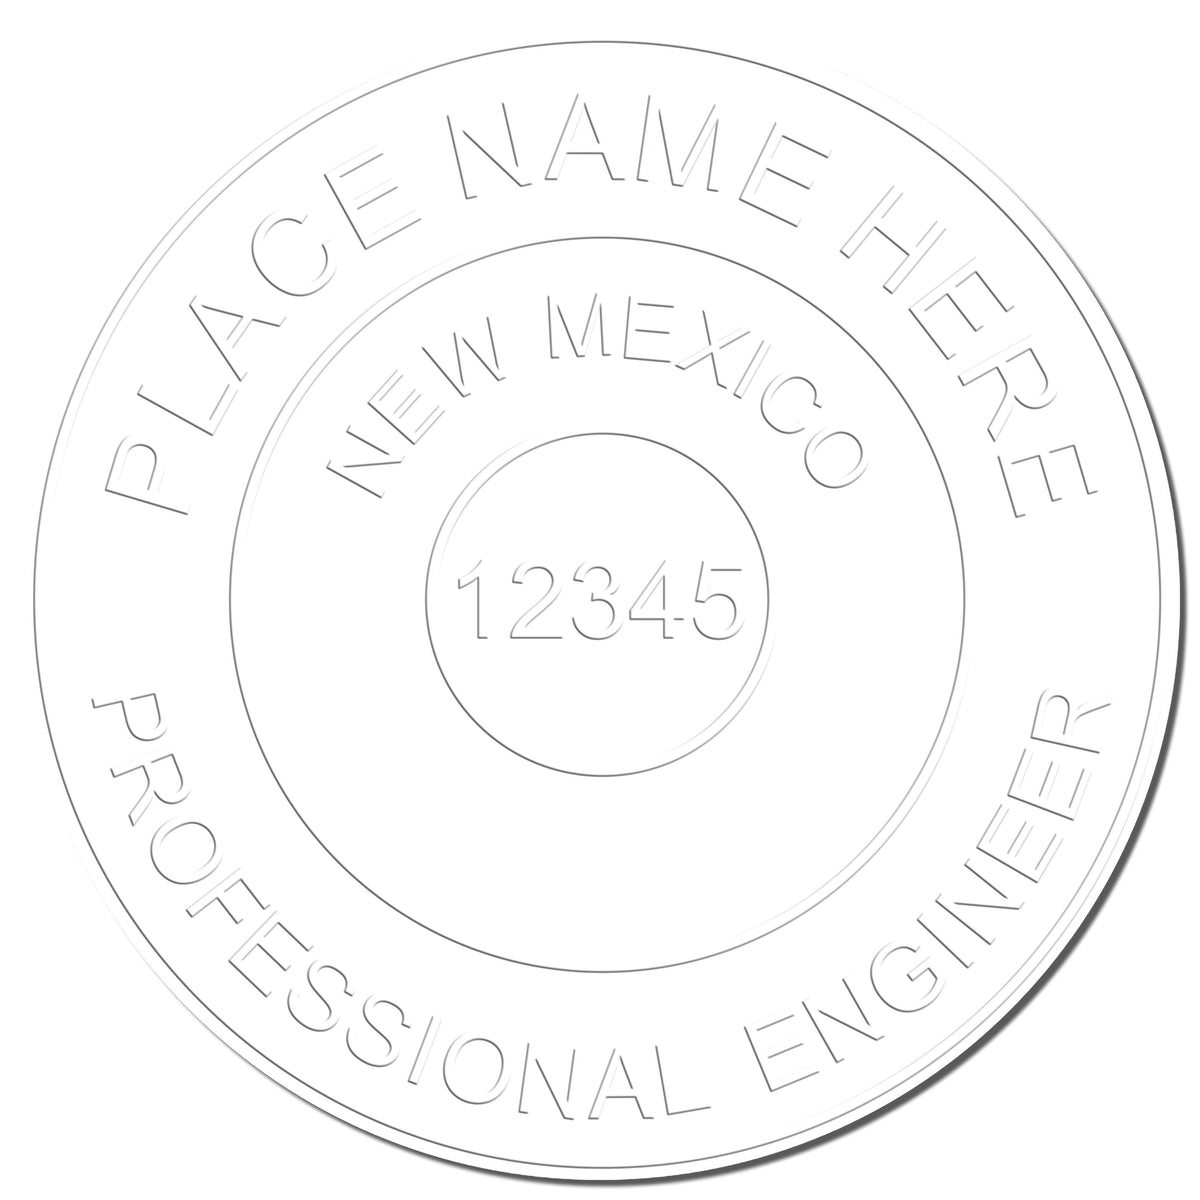 This paper is stamped with a sample imprint of the State of New Mexico Extended Long Reach Engineer Seal, signifying its quality and reliability.